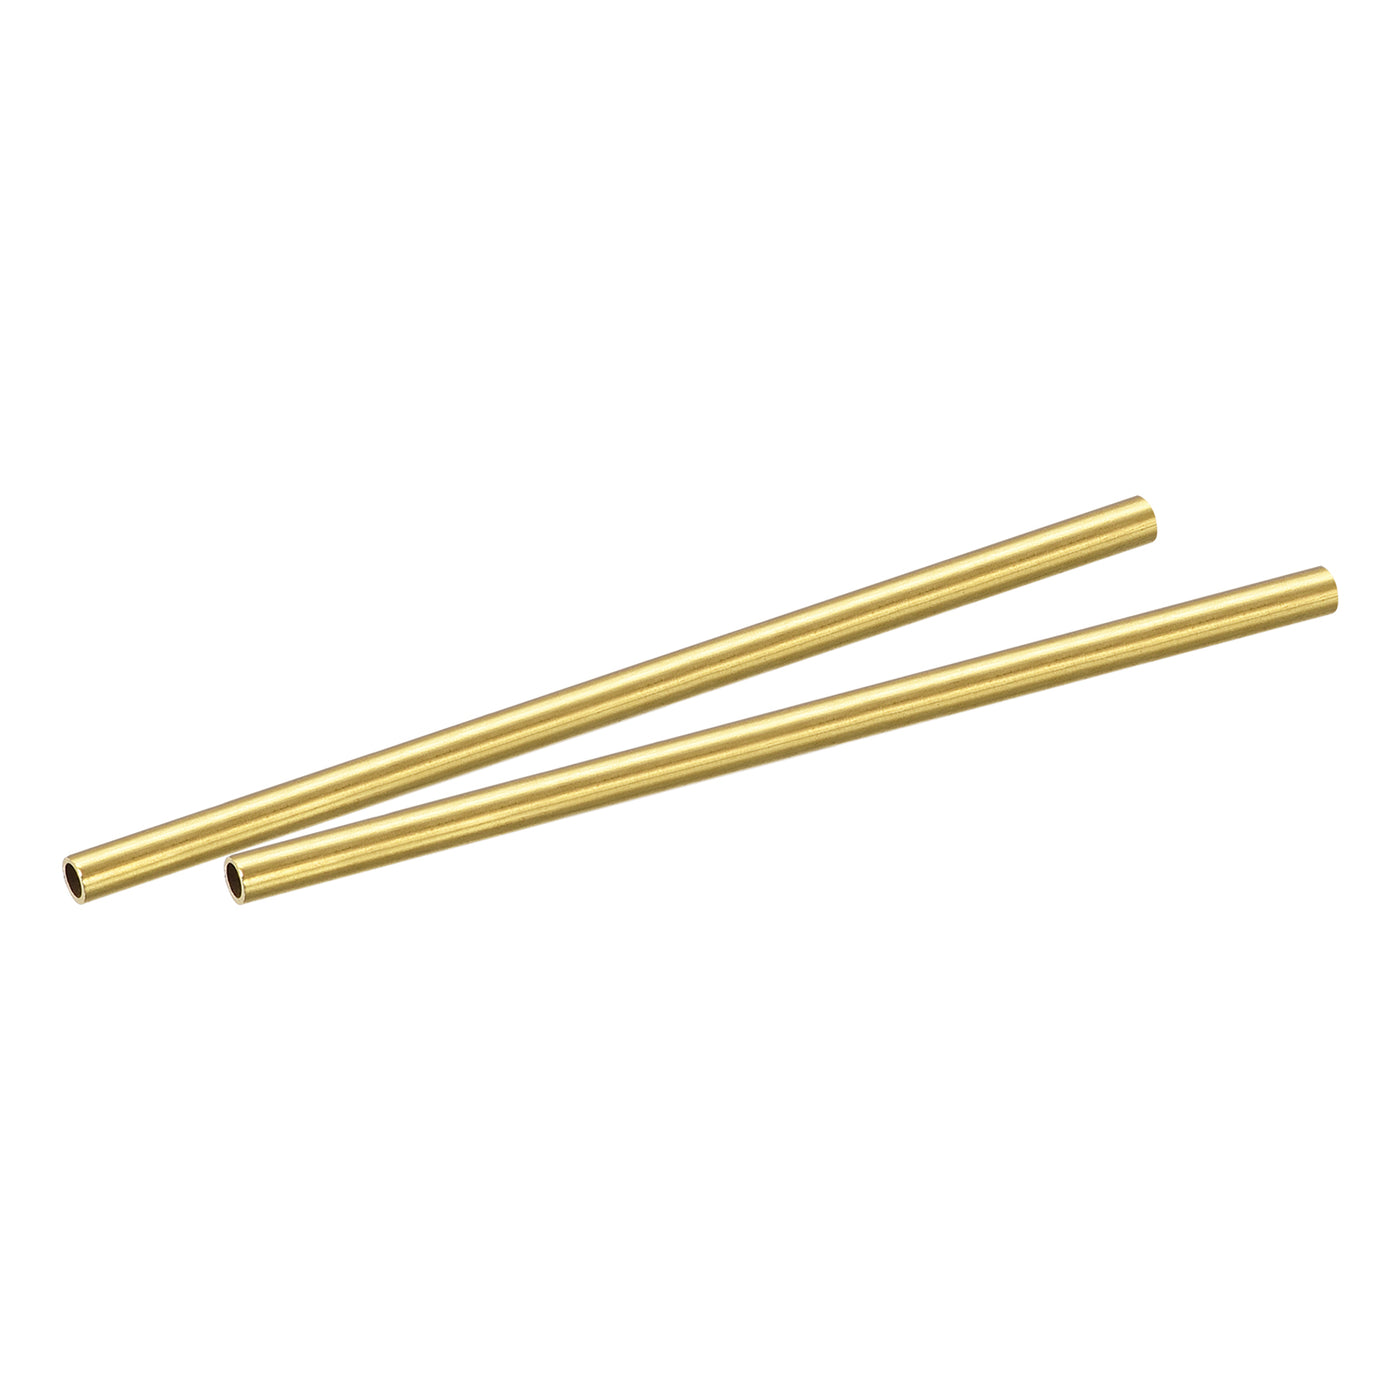 3Pcs 8mm x 0.2mm x 400mm Seamless Straight Brass Tube for Industry DIY  Projects